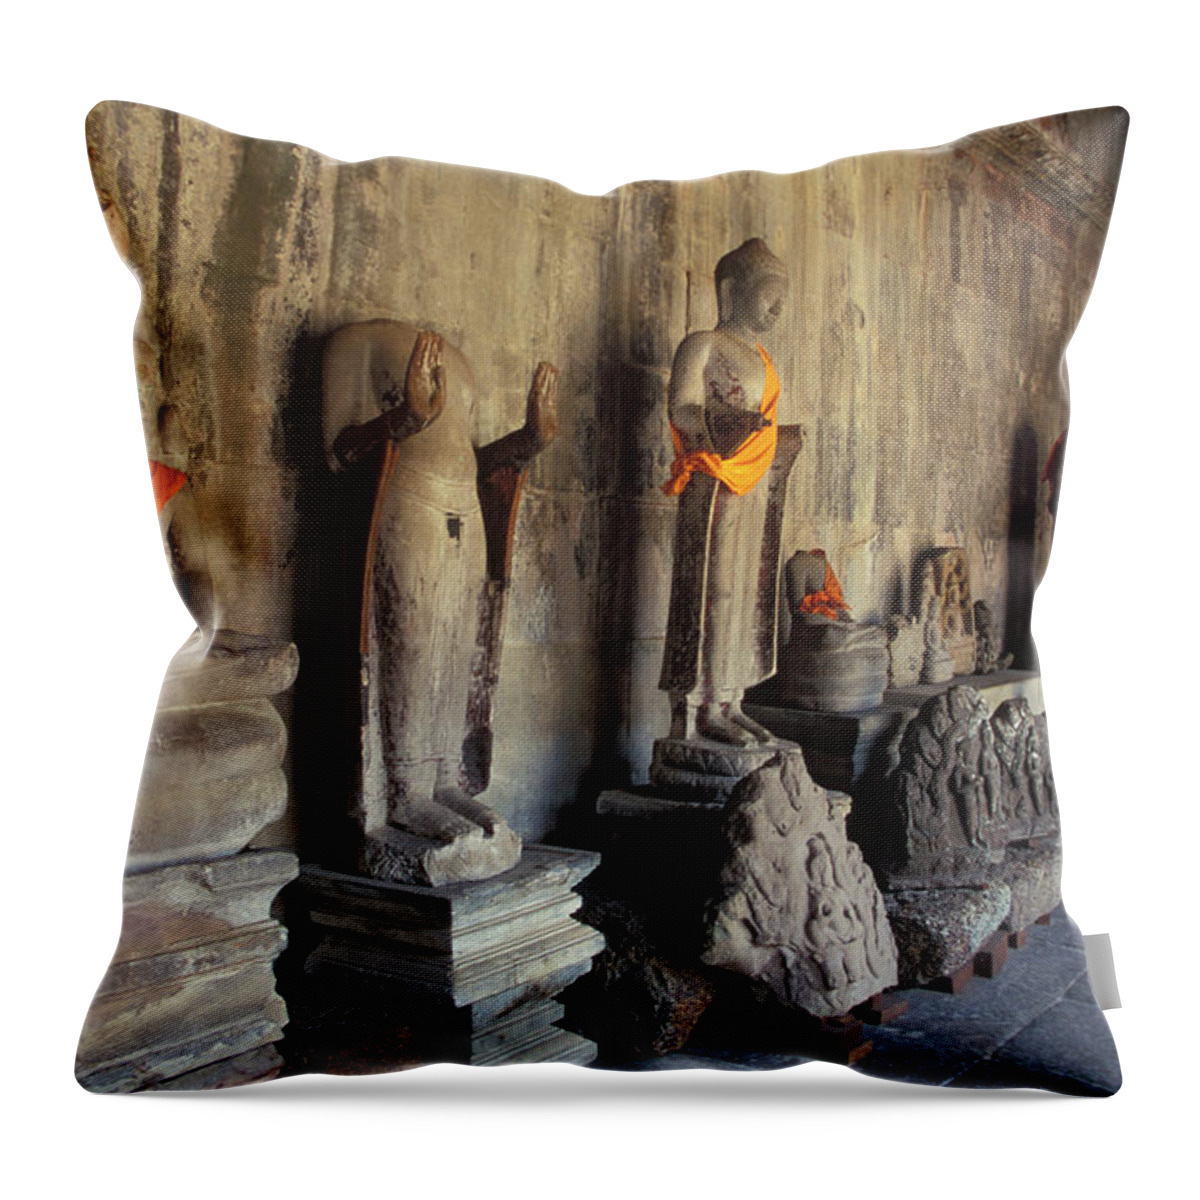 Tranquility Throw Pillow featuring the photograph Buddha Statues, Angkor Wat, Cambodia by James Gritz